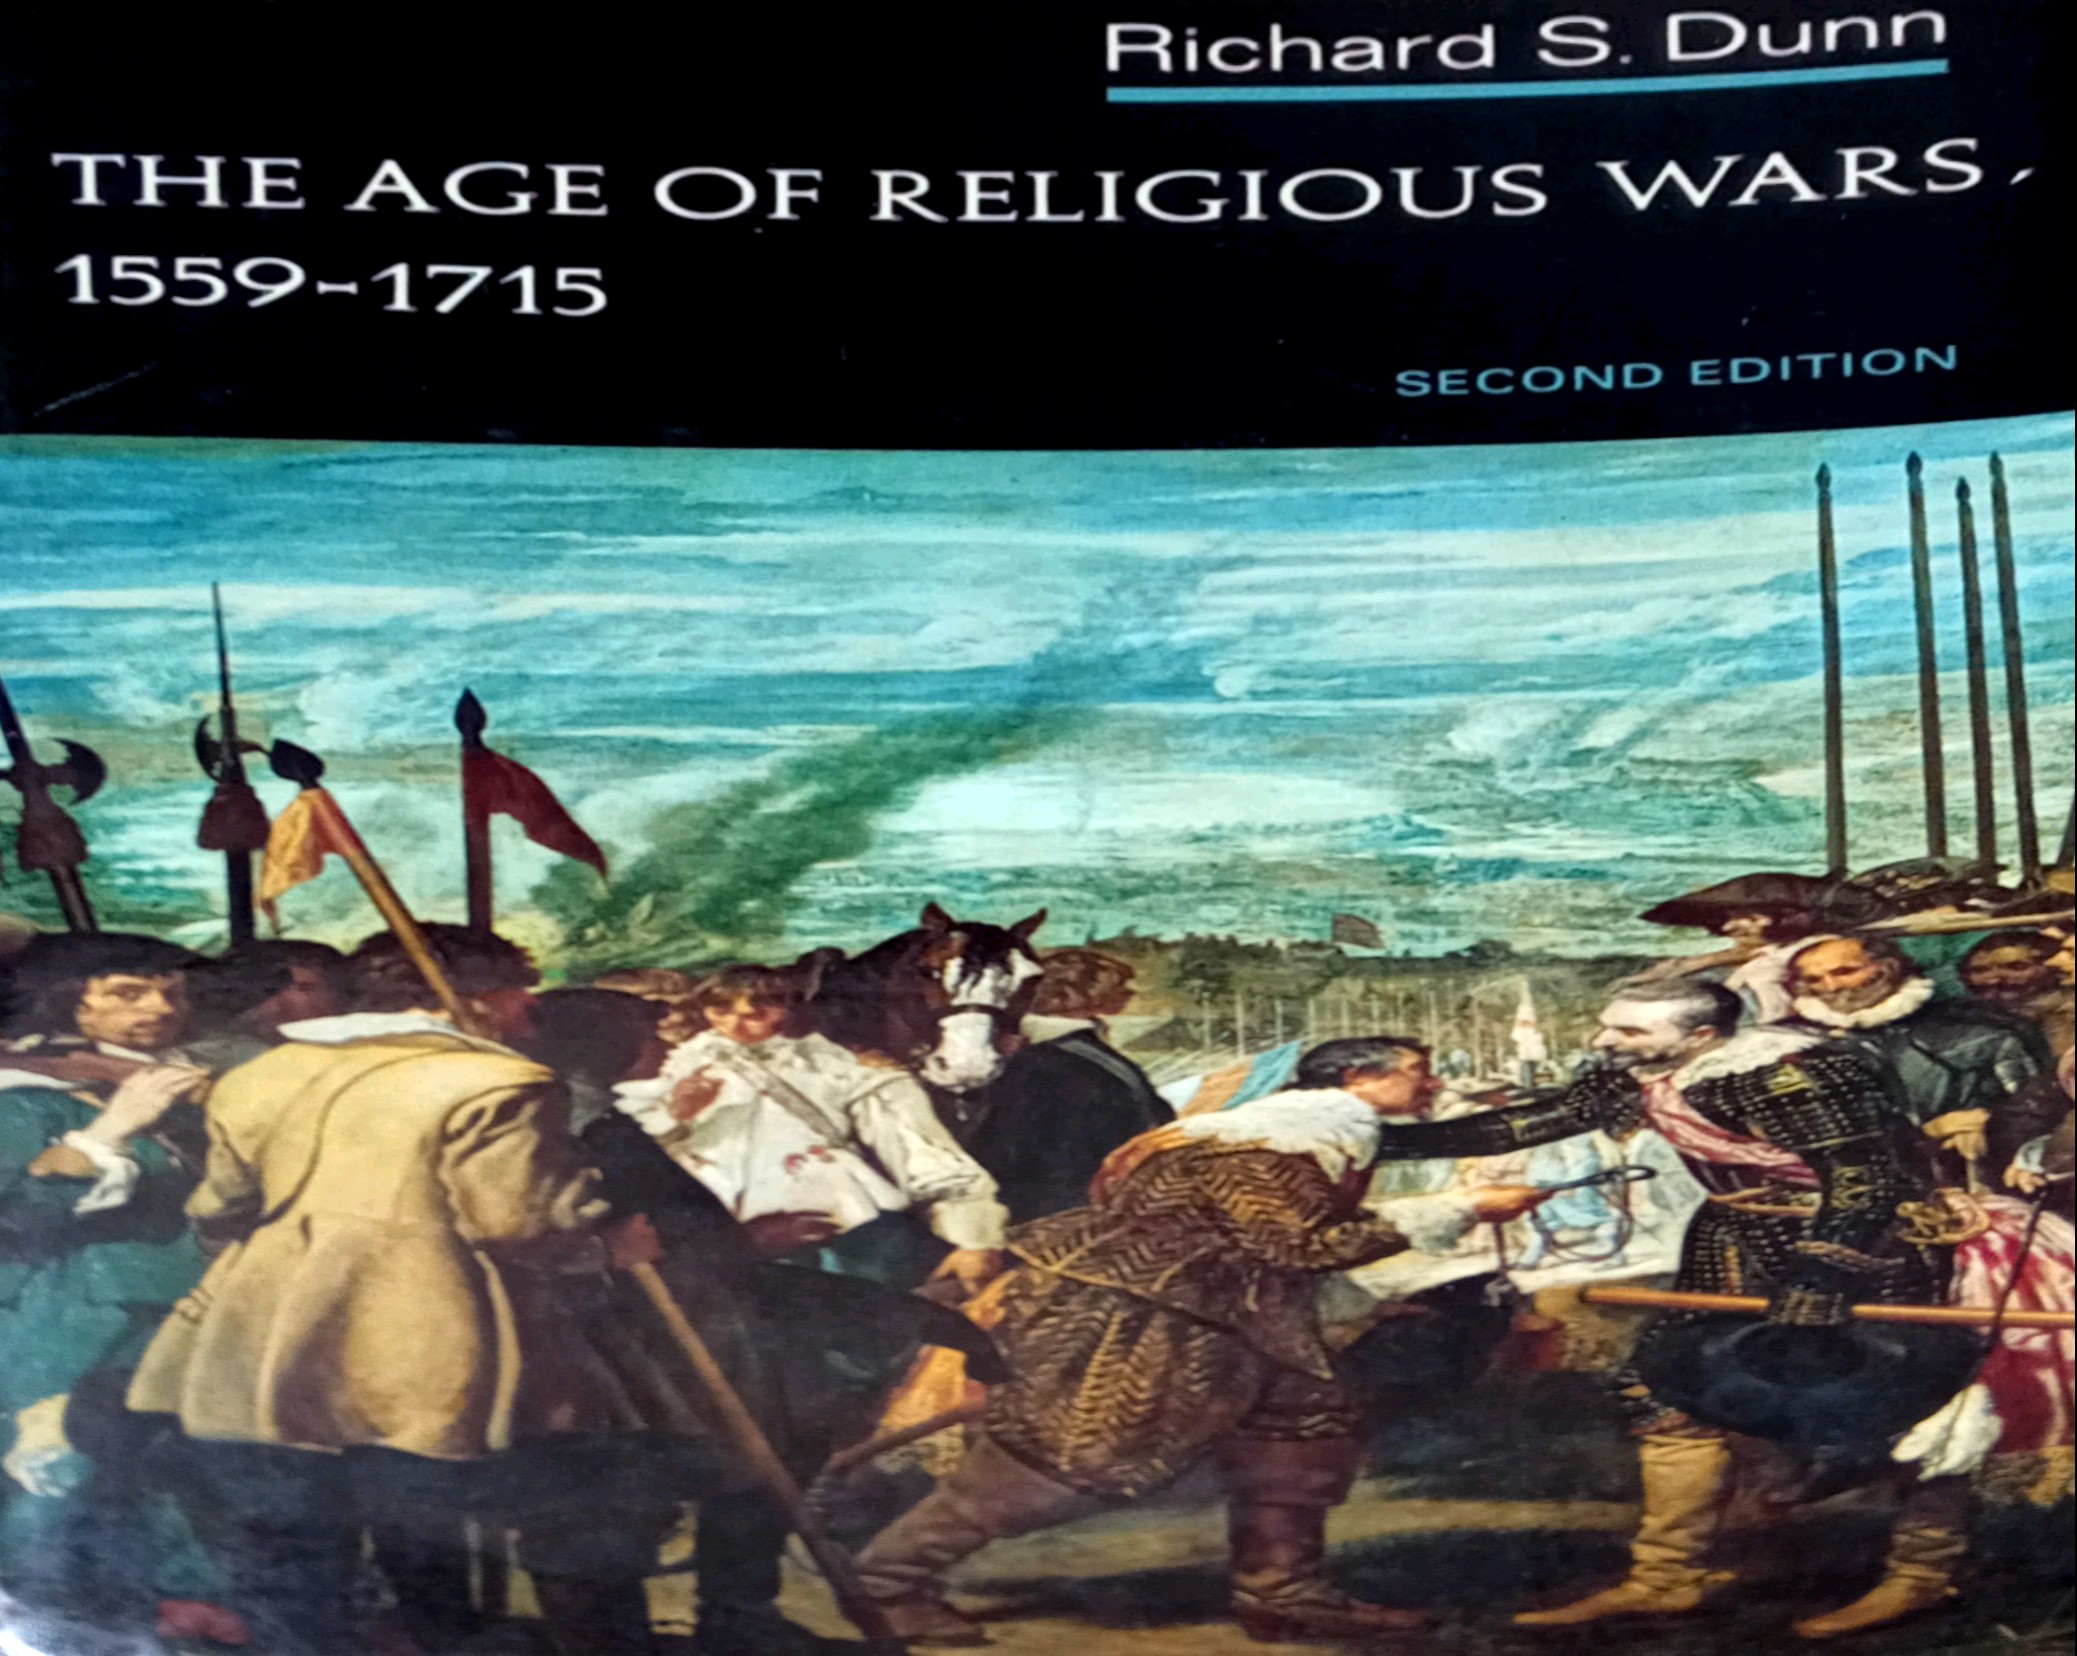 THE AGE OF RELIGIOUS WARS, 1559-1715